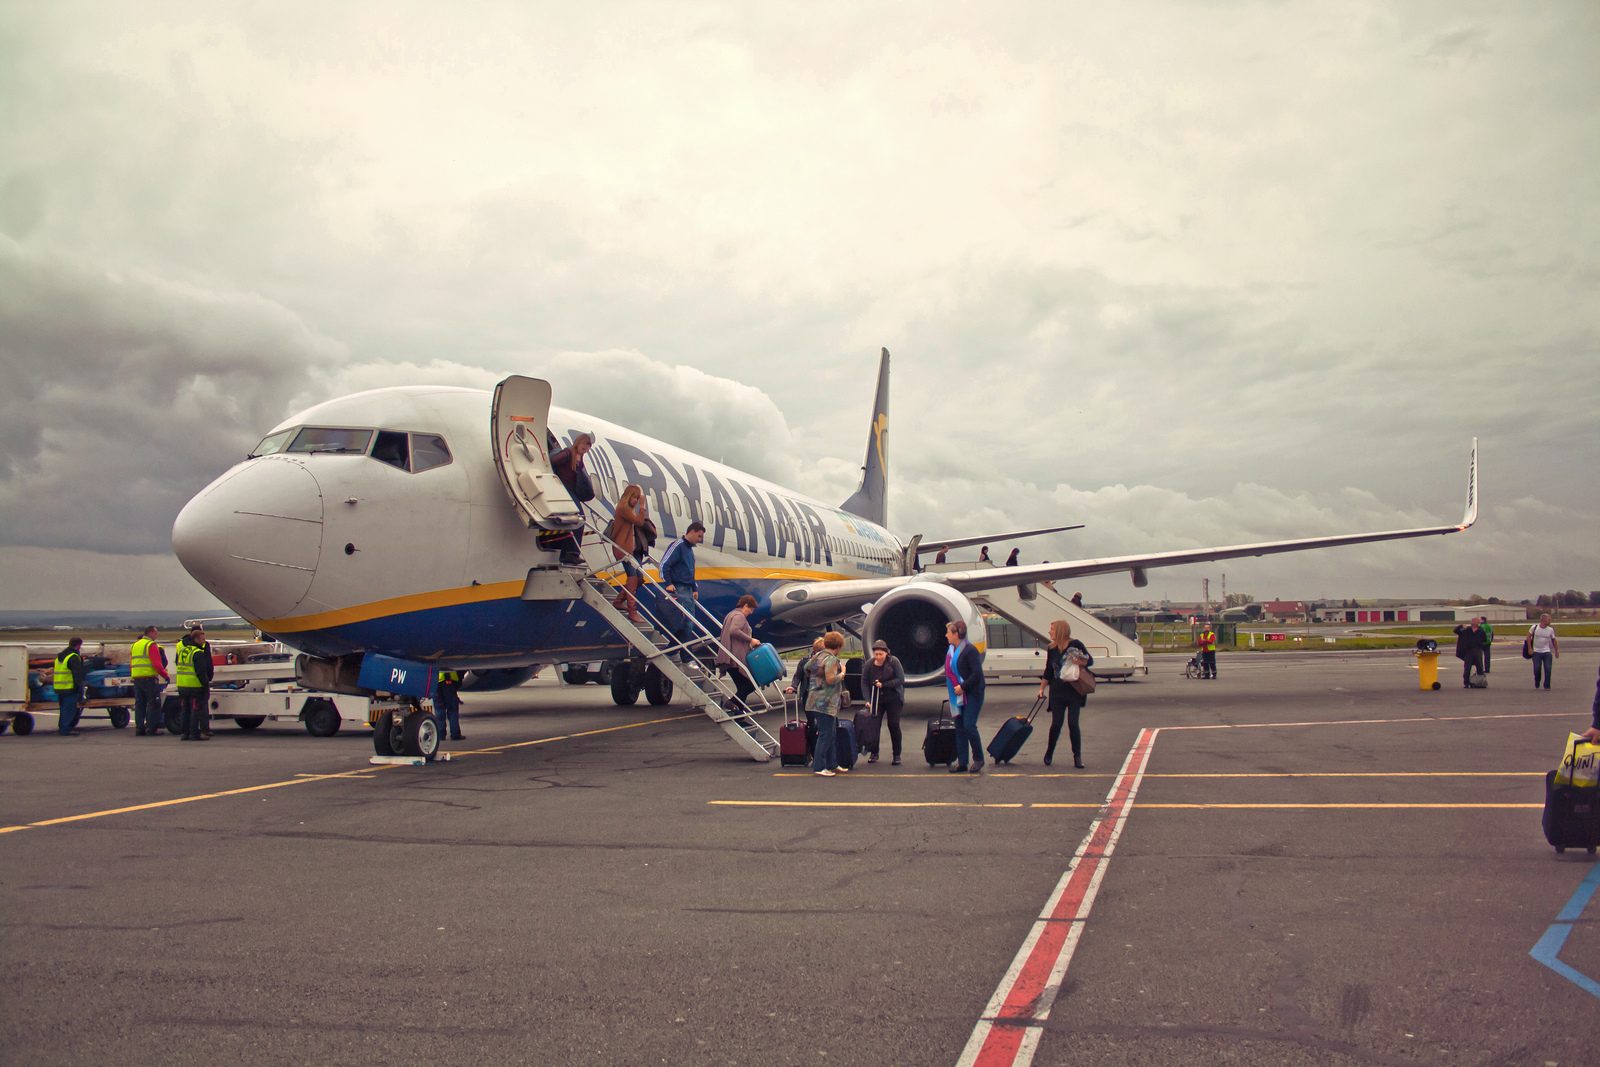 REPORT: Ryanair Avoids Unionisation With Plans to Extend Polish Subsiderary